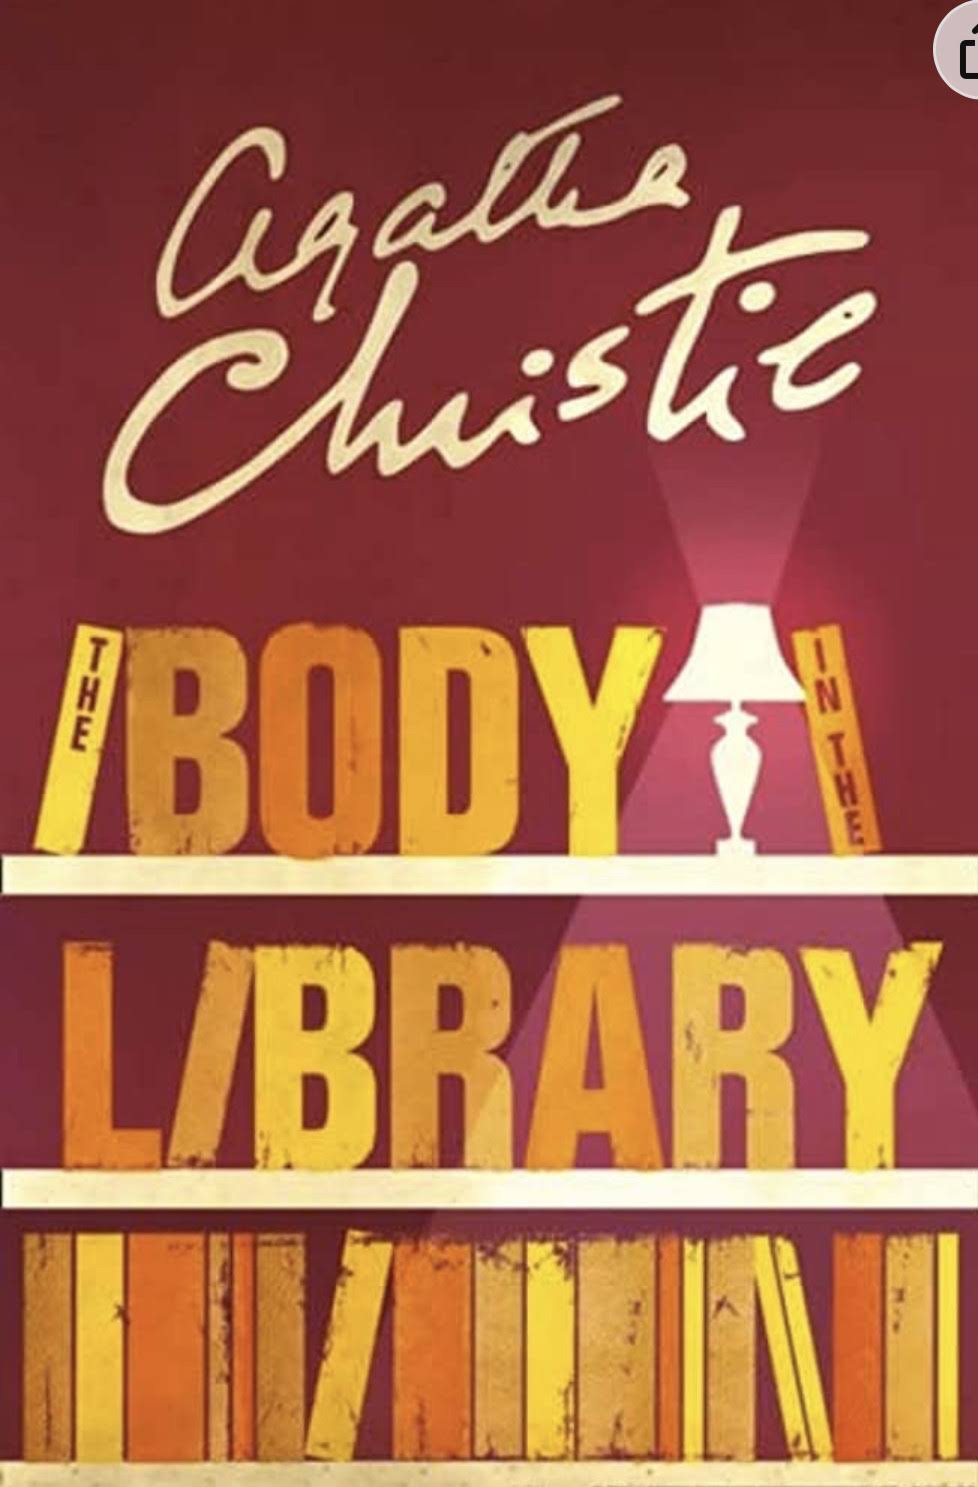 The Body in The Library by Agatha Christie